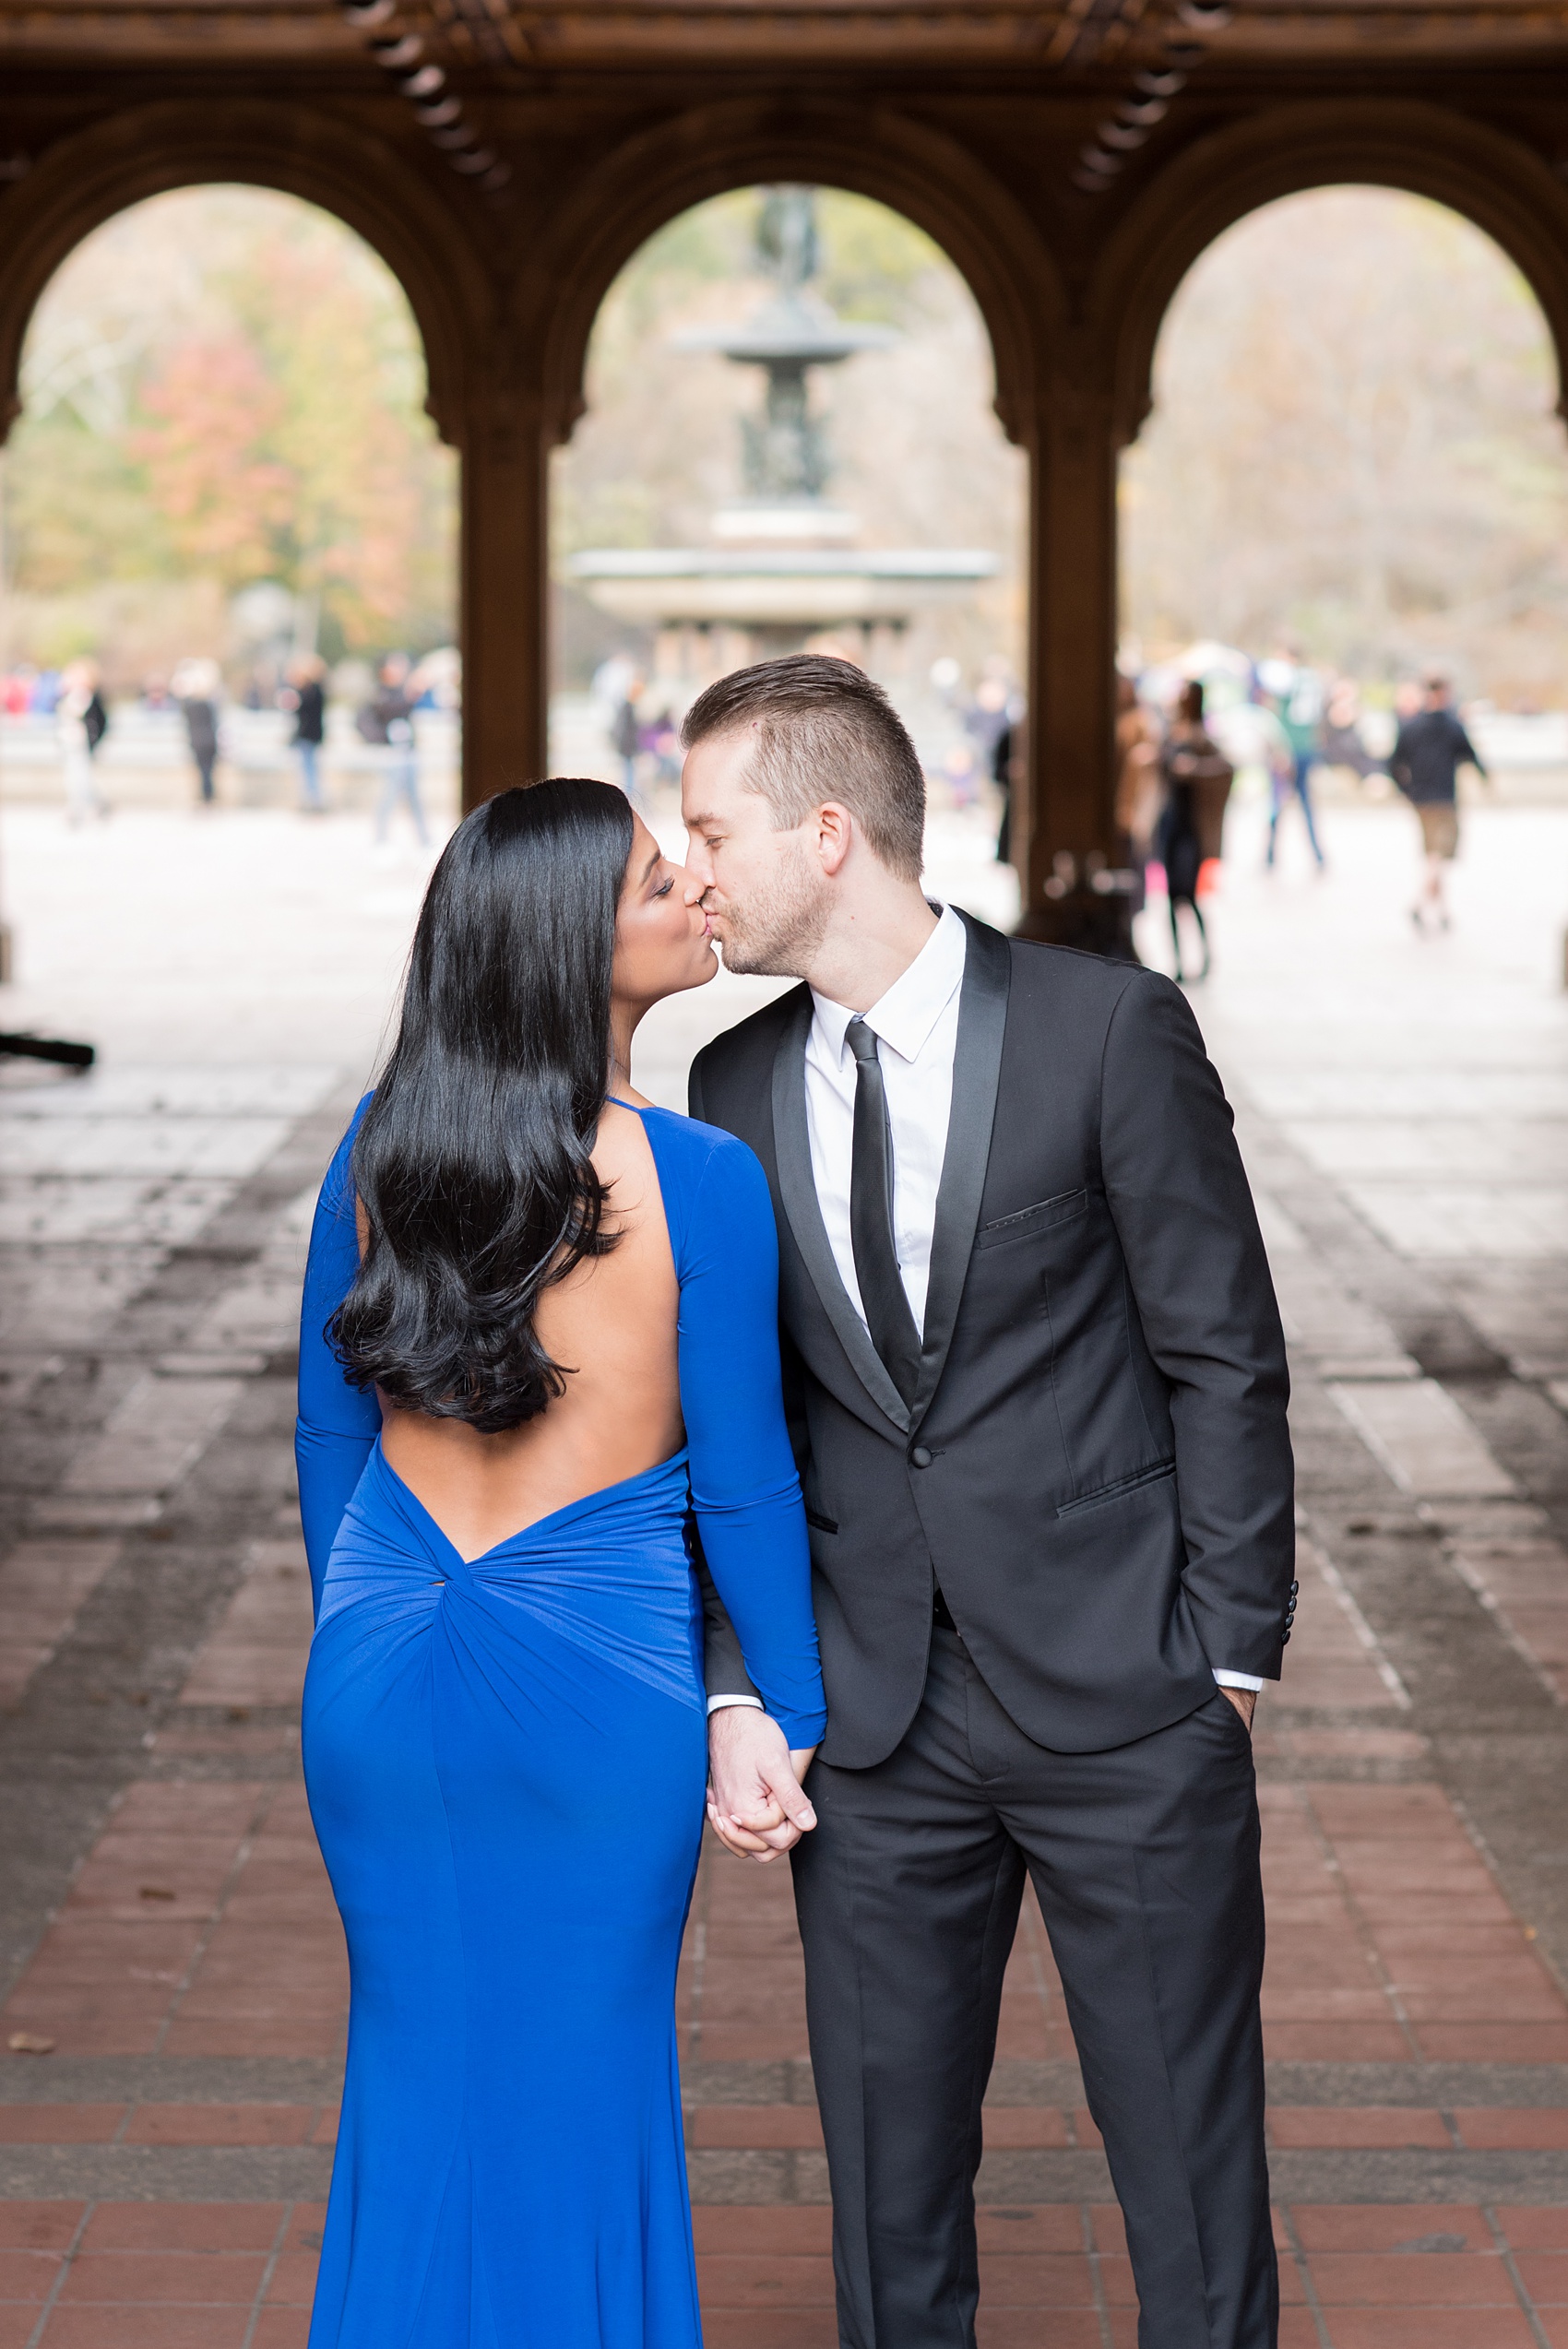 Mikkel Paige Photography pictures of an engagement session in Central Park. The bride wore a sexy back cobalt blue dress for a kiss by Bethesda Fountain.